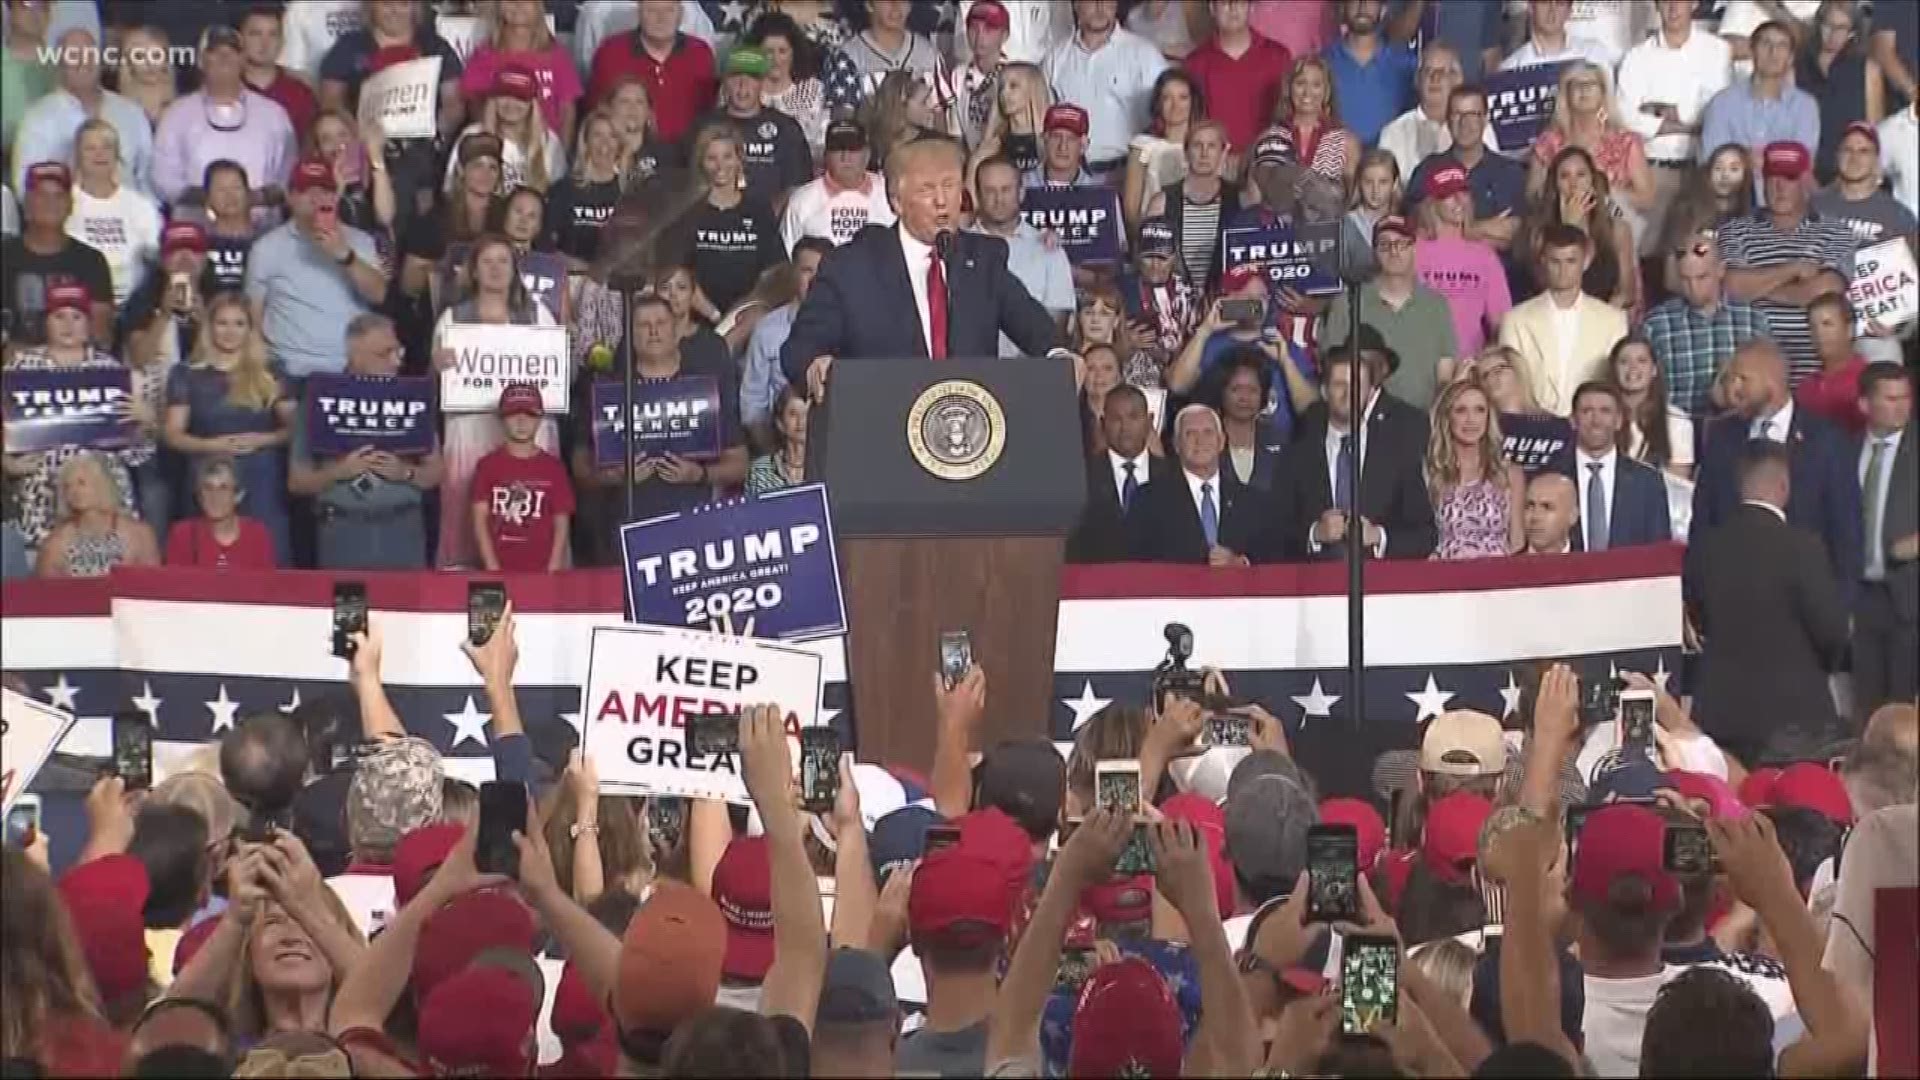 The president said the rally will be in support of Republican Dan Bishop who is running for congress in a controversial race against Democrat Dan McCready.